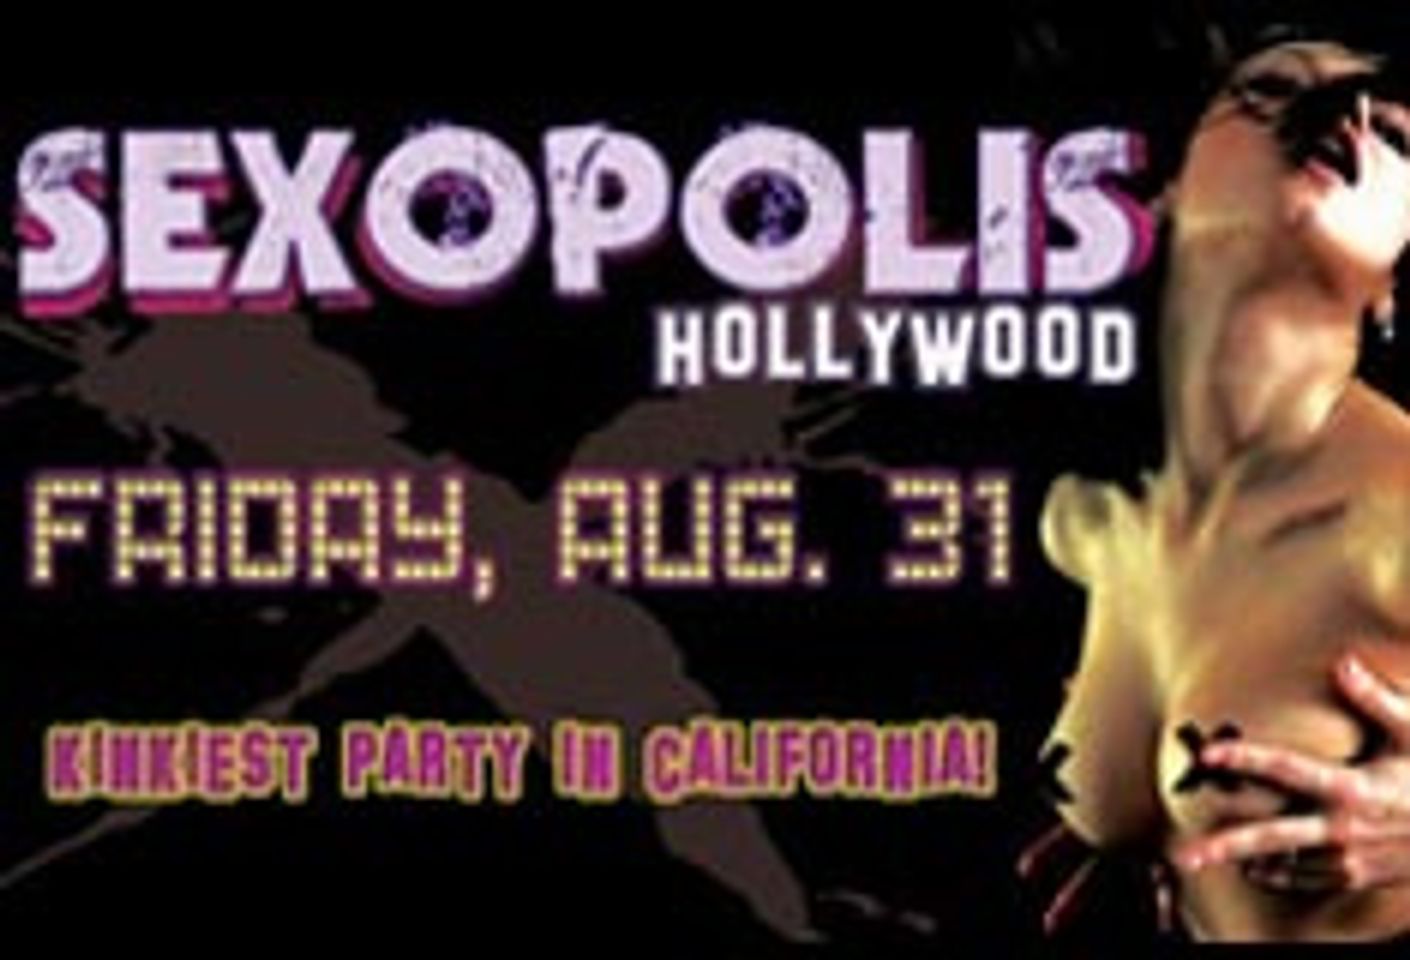 Ron Jeremy, Seymore Butts to Host 'Sexopolis' Erotic Ball